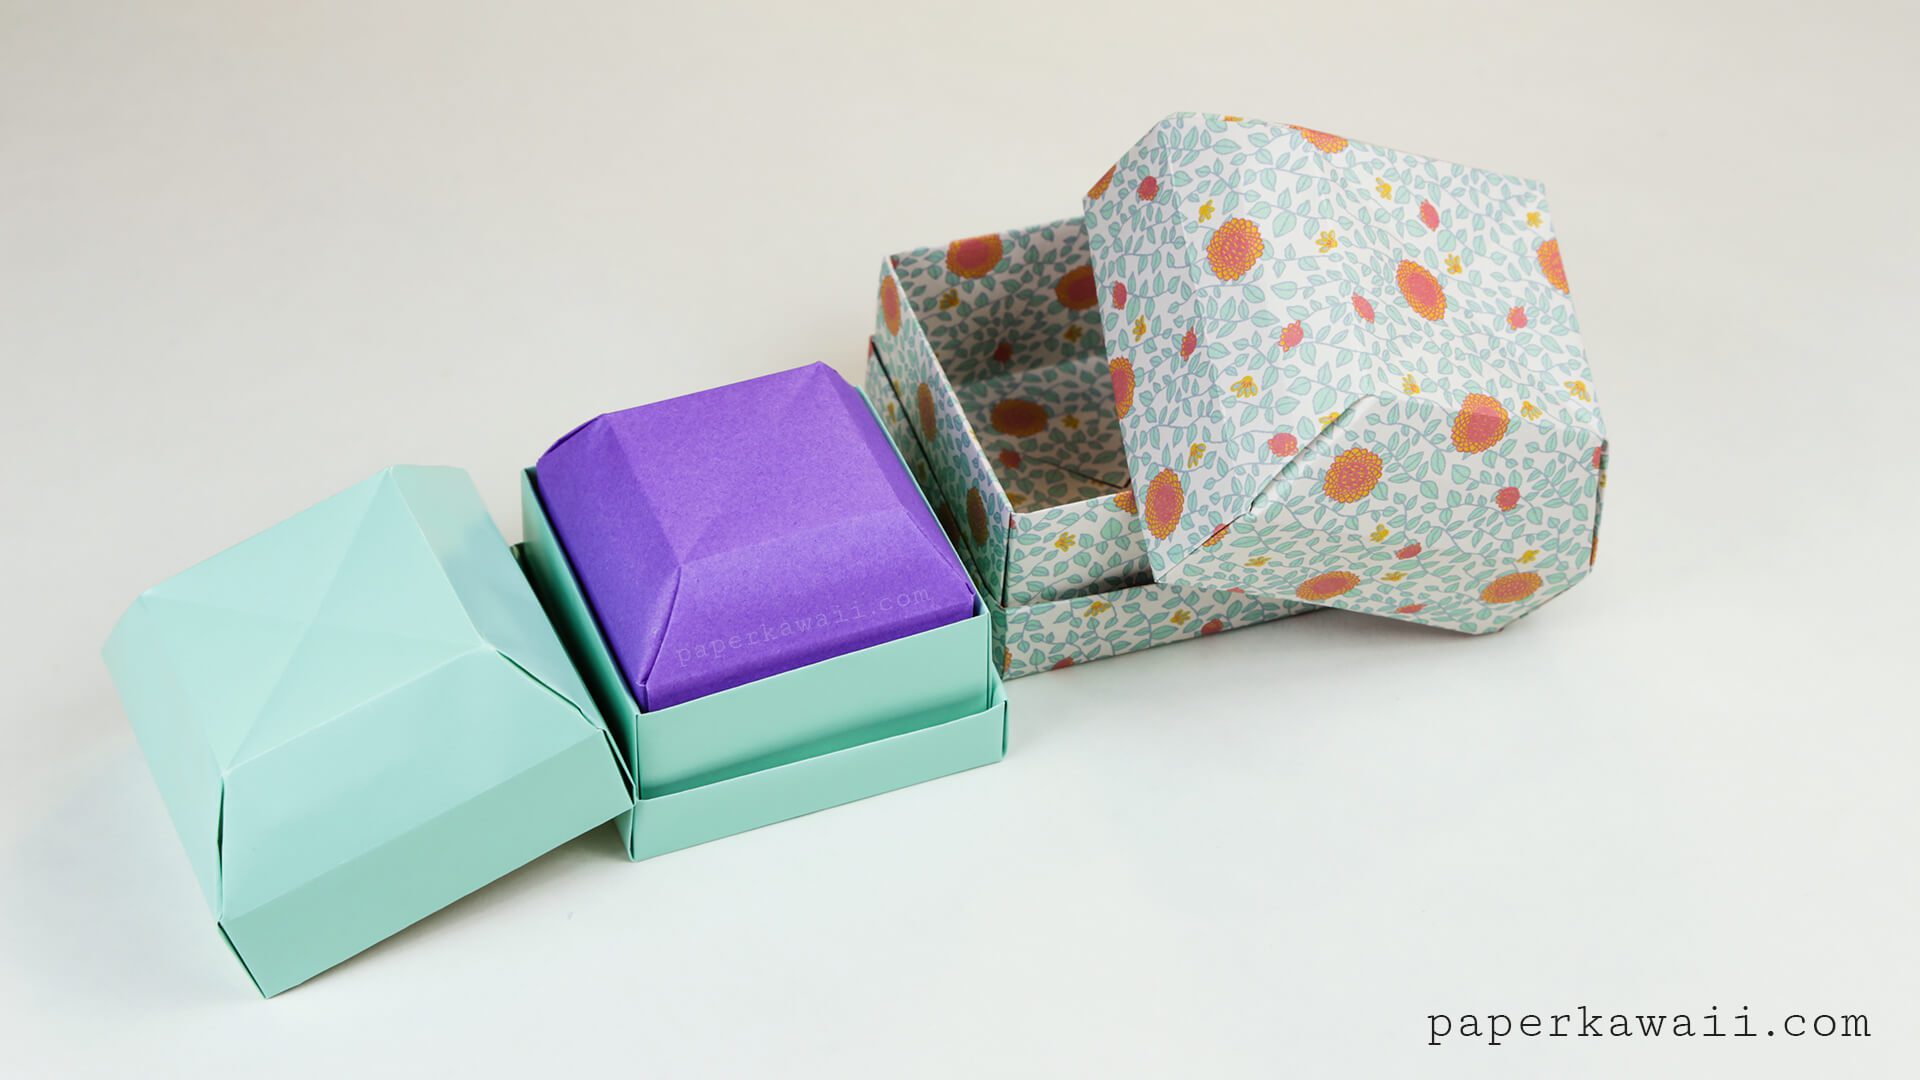 Origami Gem Gift Box Tutorial - These nest inside each other!